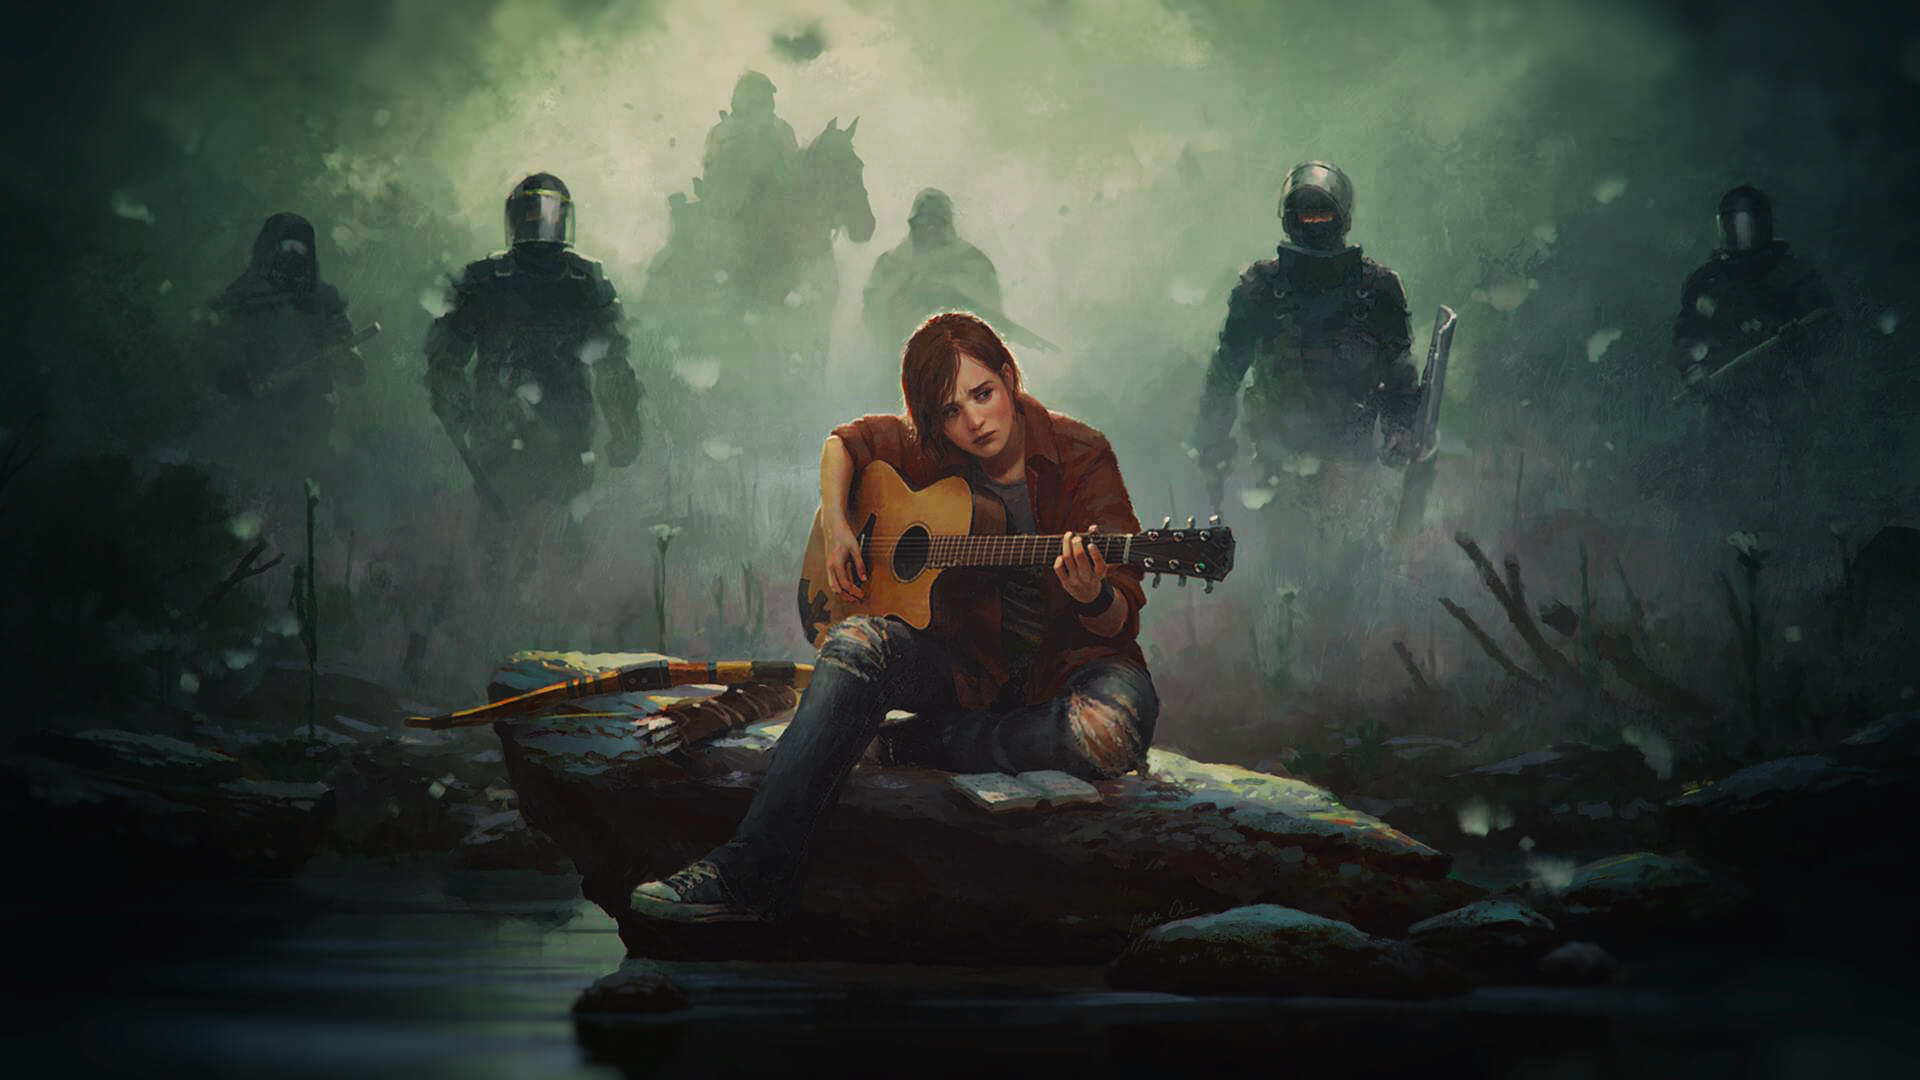 Teen girl playing guitar while sitting on a rock and people with riot gear appear behind her.